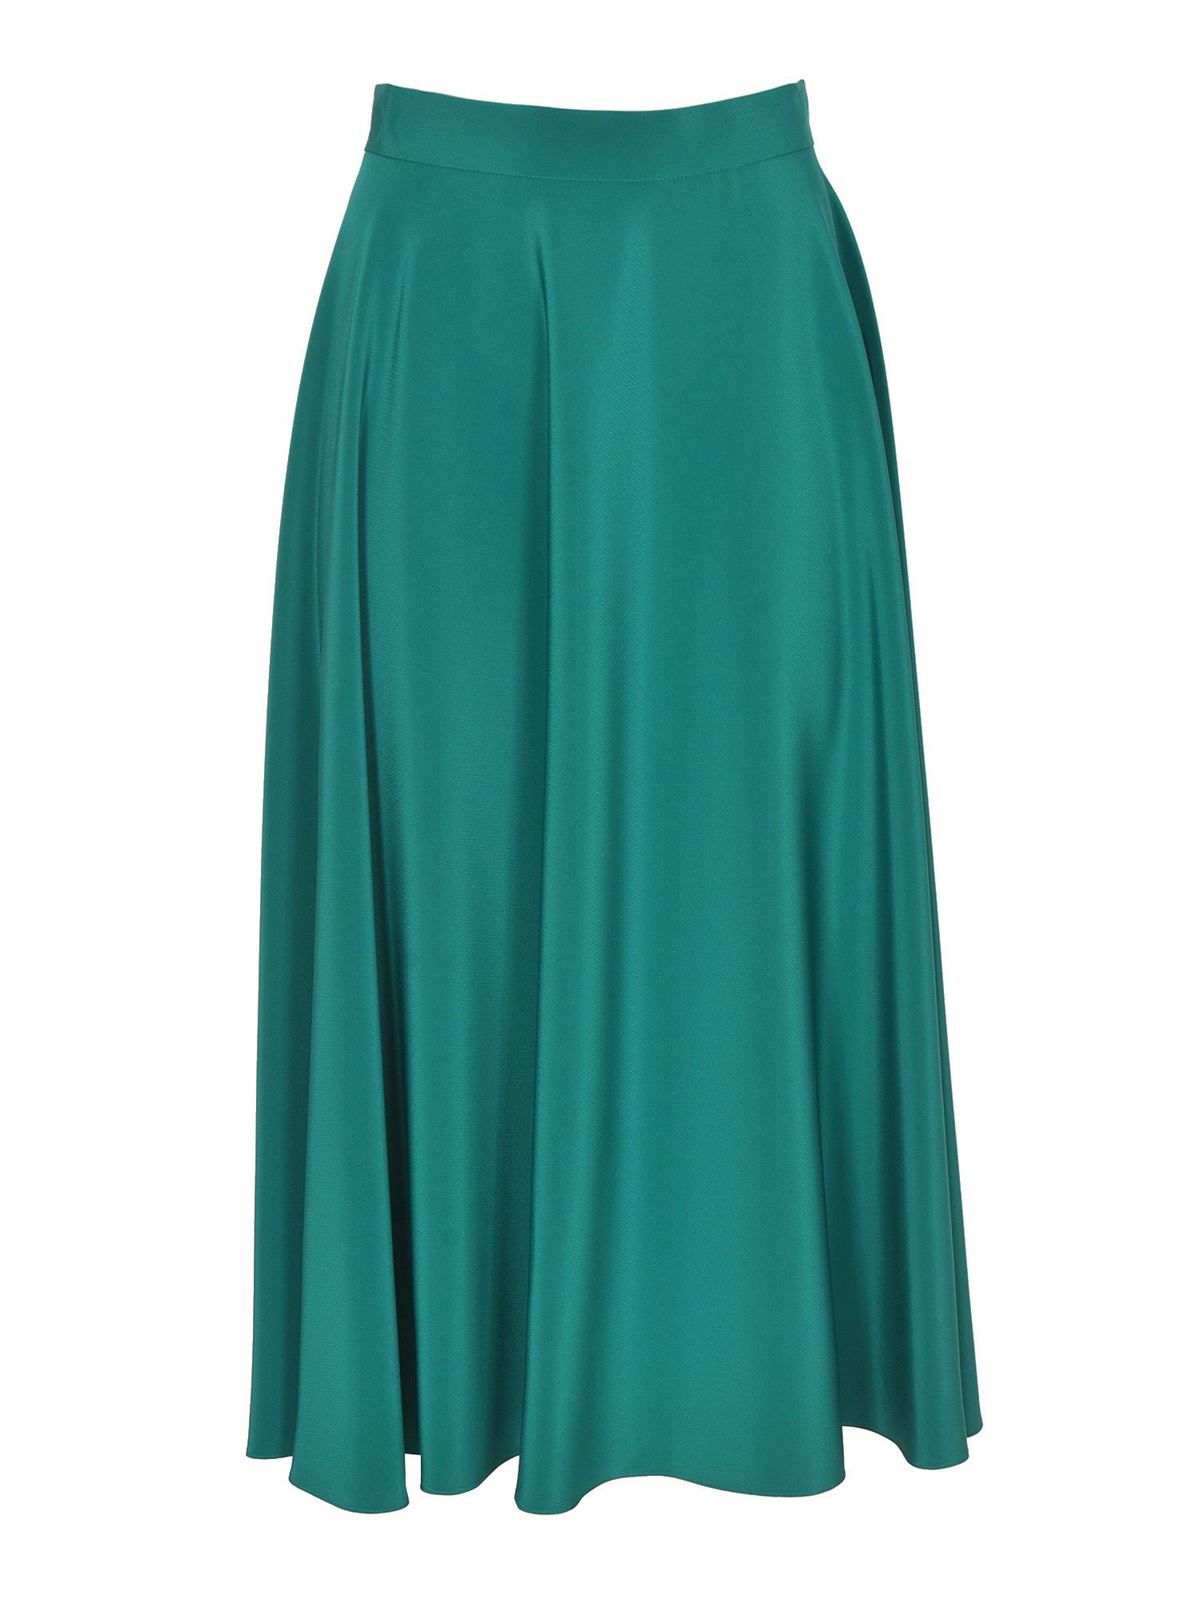 Gianluca Capannolo LOUISE SKIRT IN TEAL COLOR